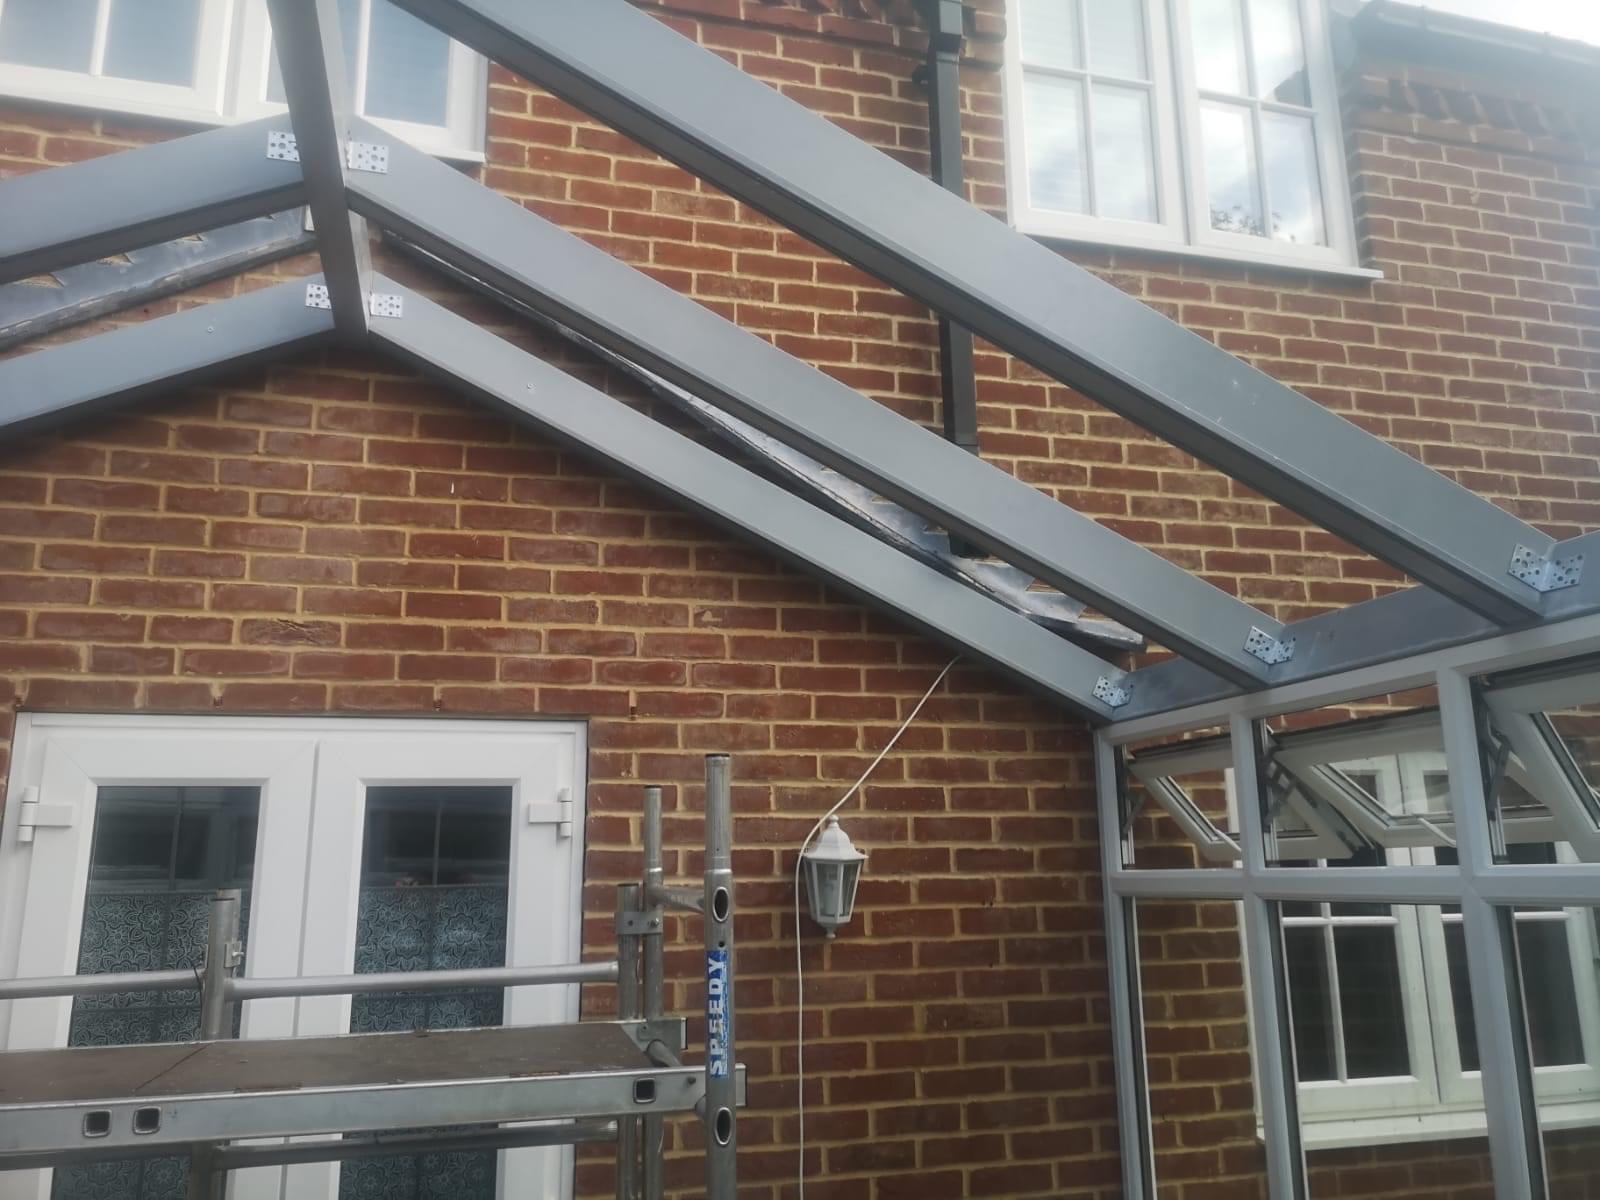 Inner fixtures of a conservatory roof